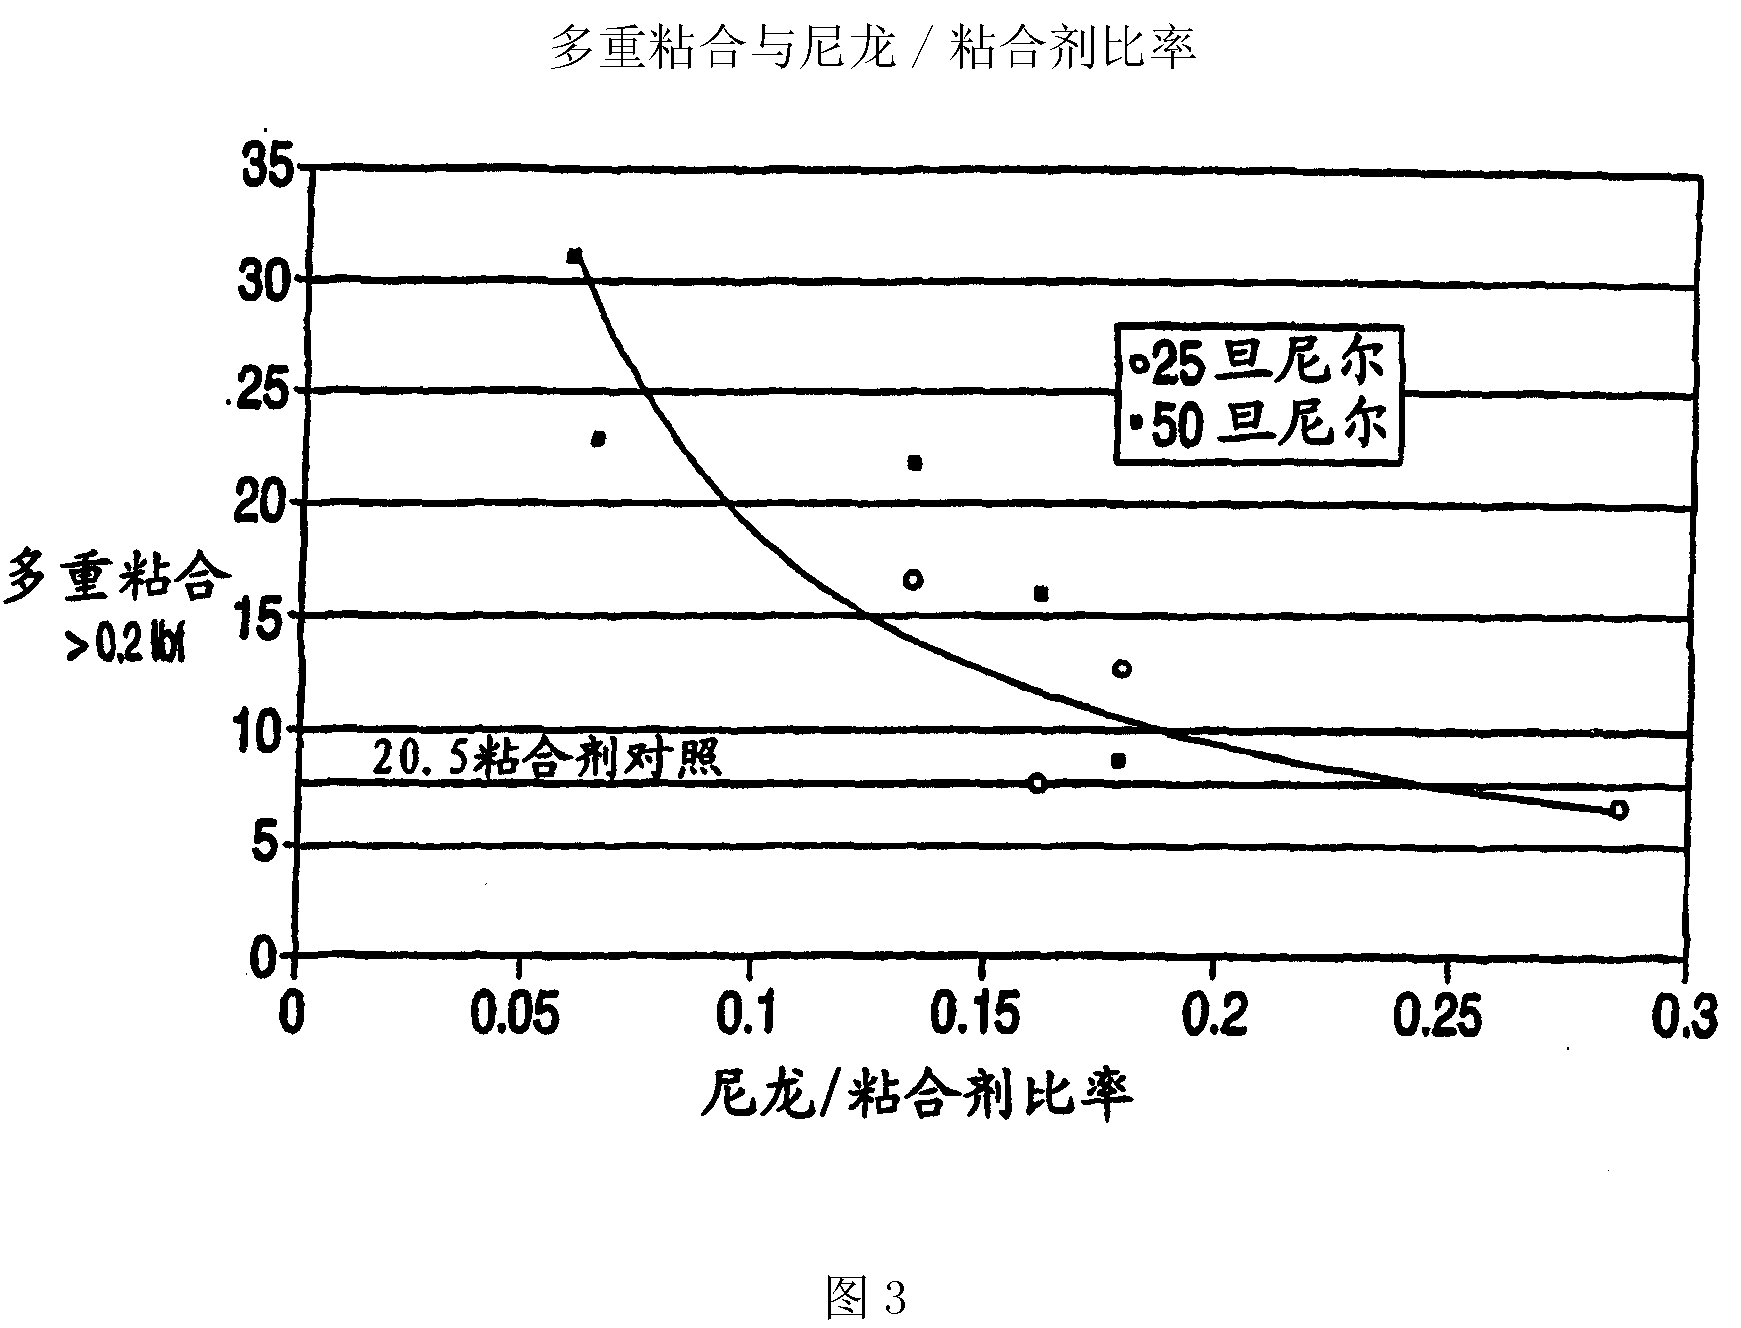 Multiphase fiber materials and compositions, methods of manufacture and uses thereof